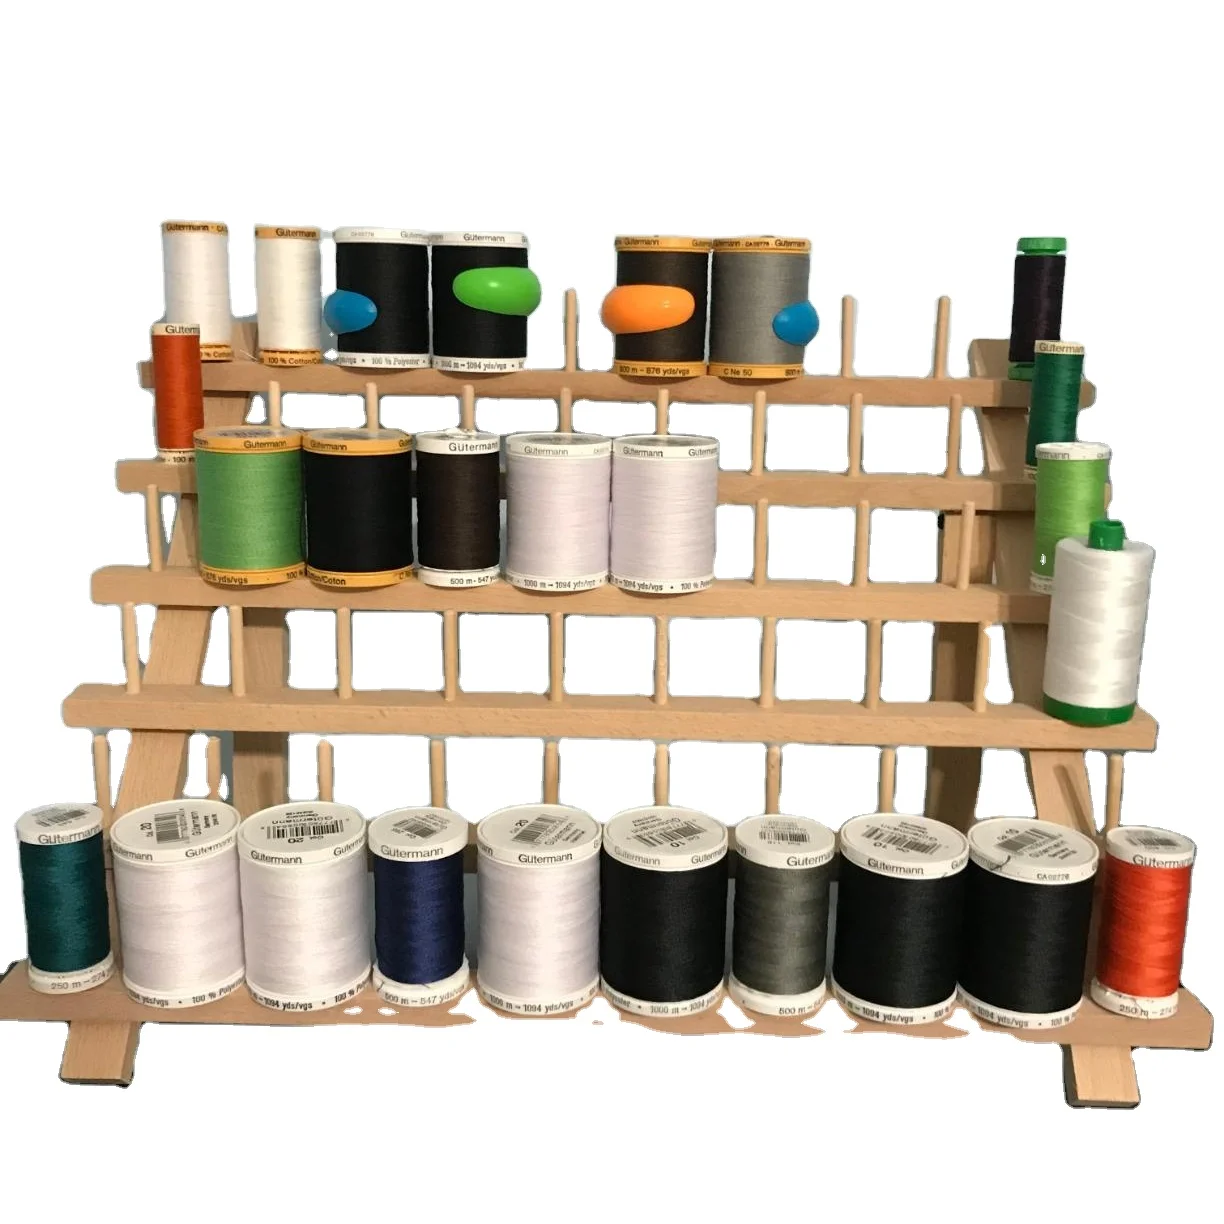 Wholesale Youlike 60-Spool Thread Rack Wooden Thread Holder Sewing Organizer for Sewing for Hair-braiding